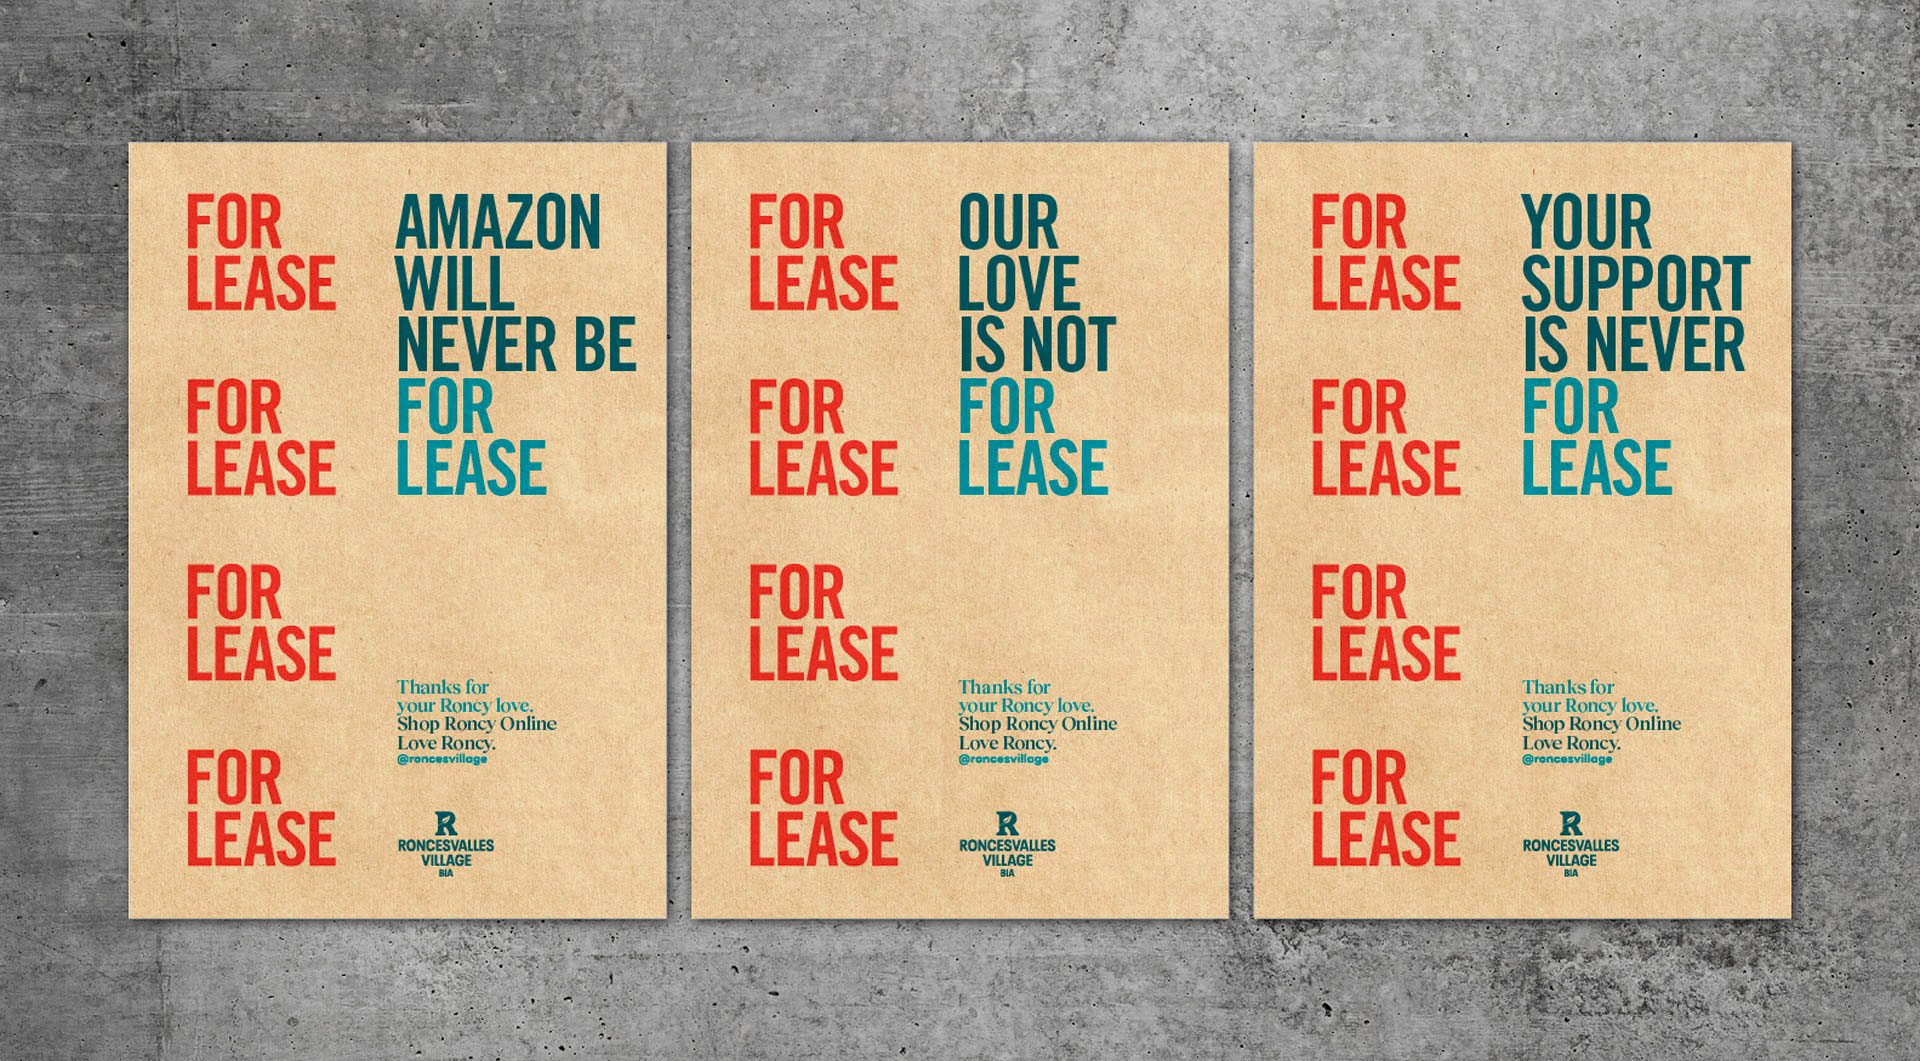 Not For Lease | MUSE Creative Awards